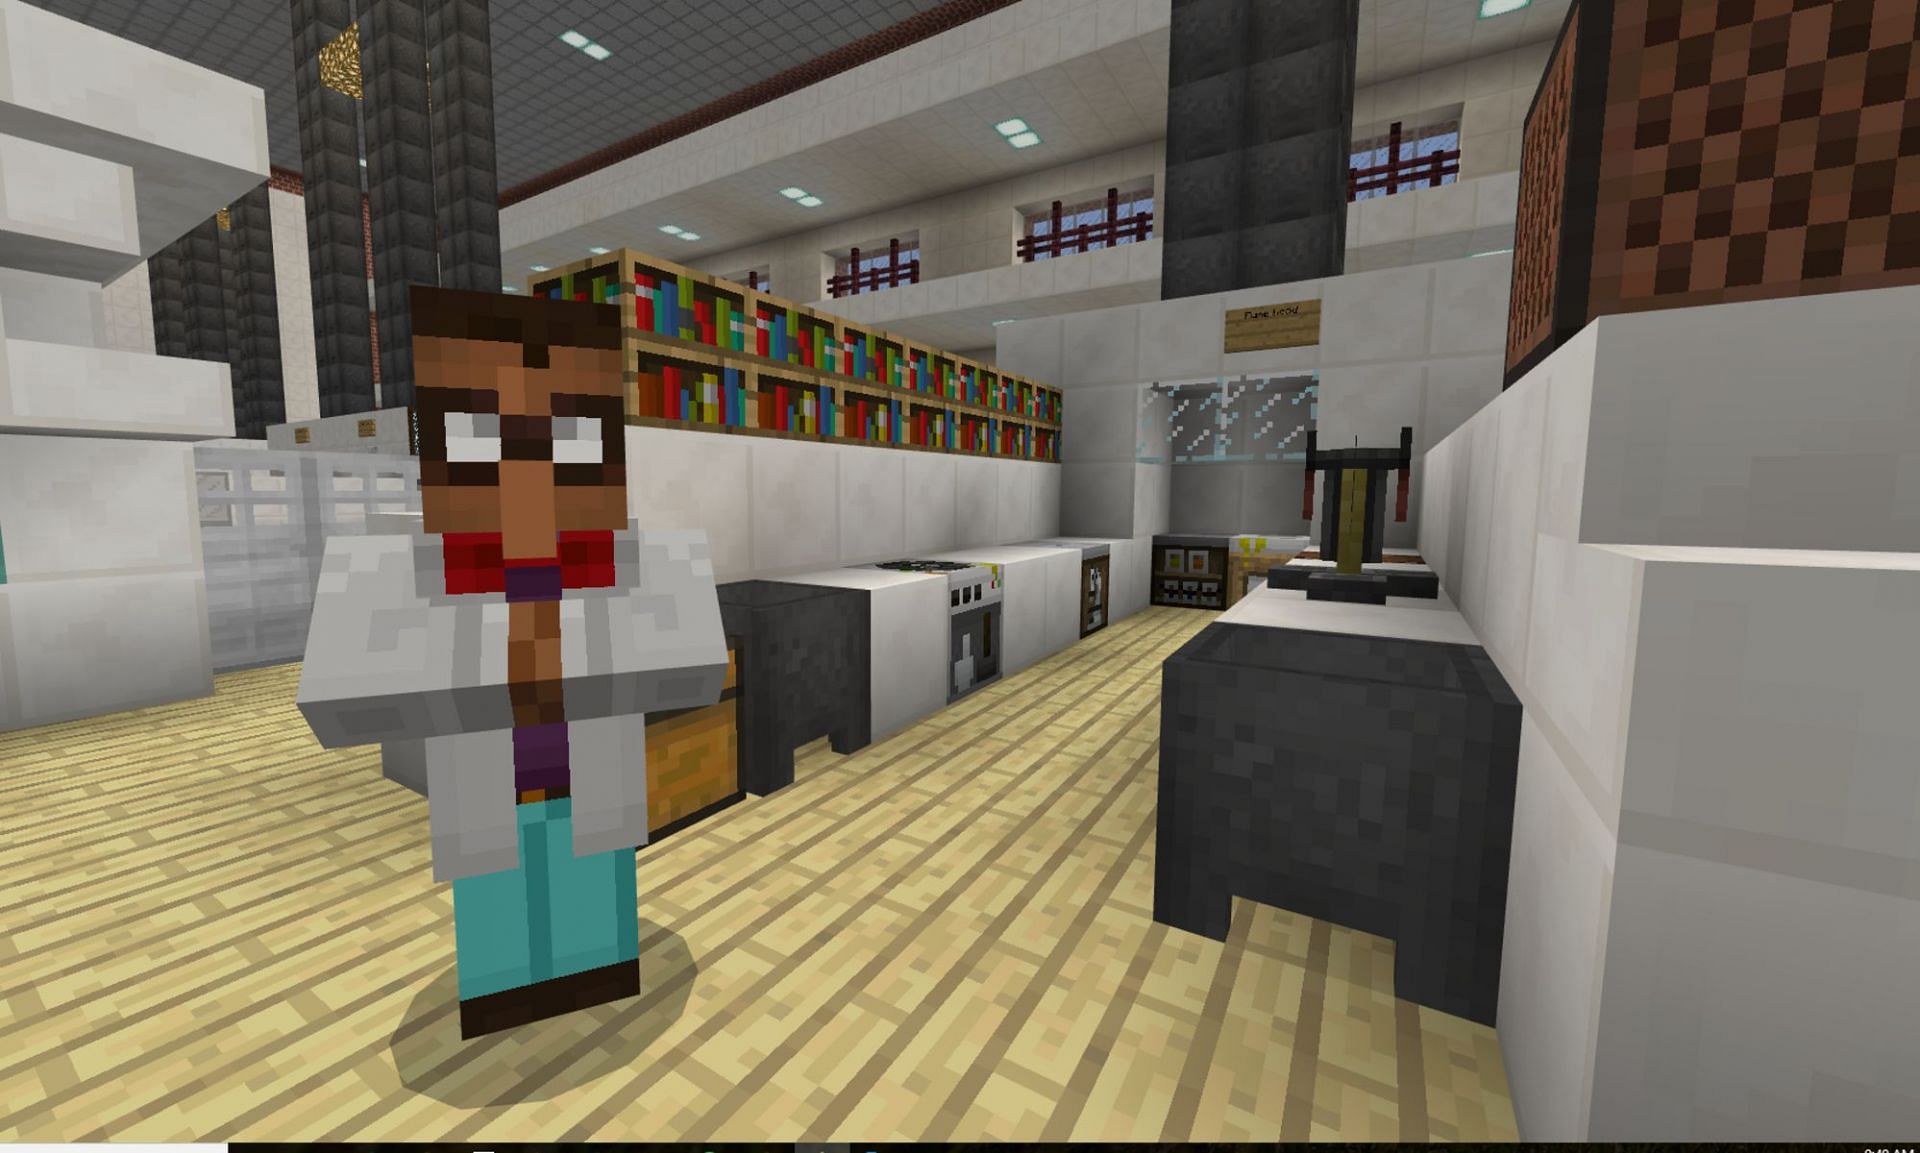 Ammonia is one of many compounds crafted through the use of chemistry in Minecraft: Education Edition (Image via Mojang)